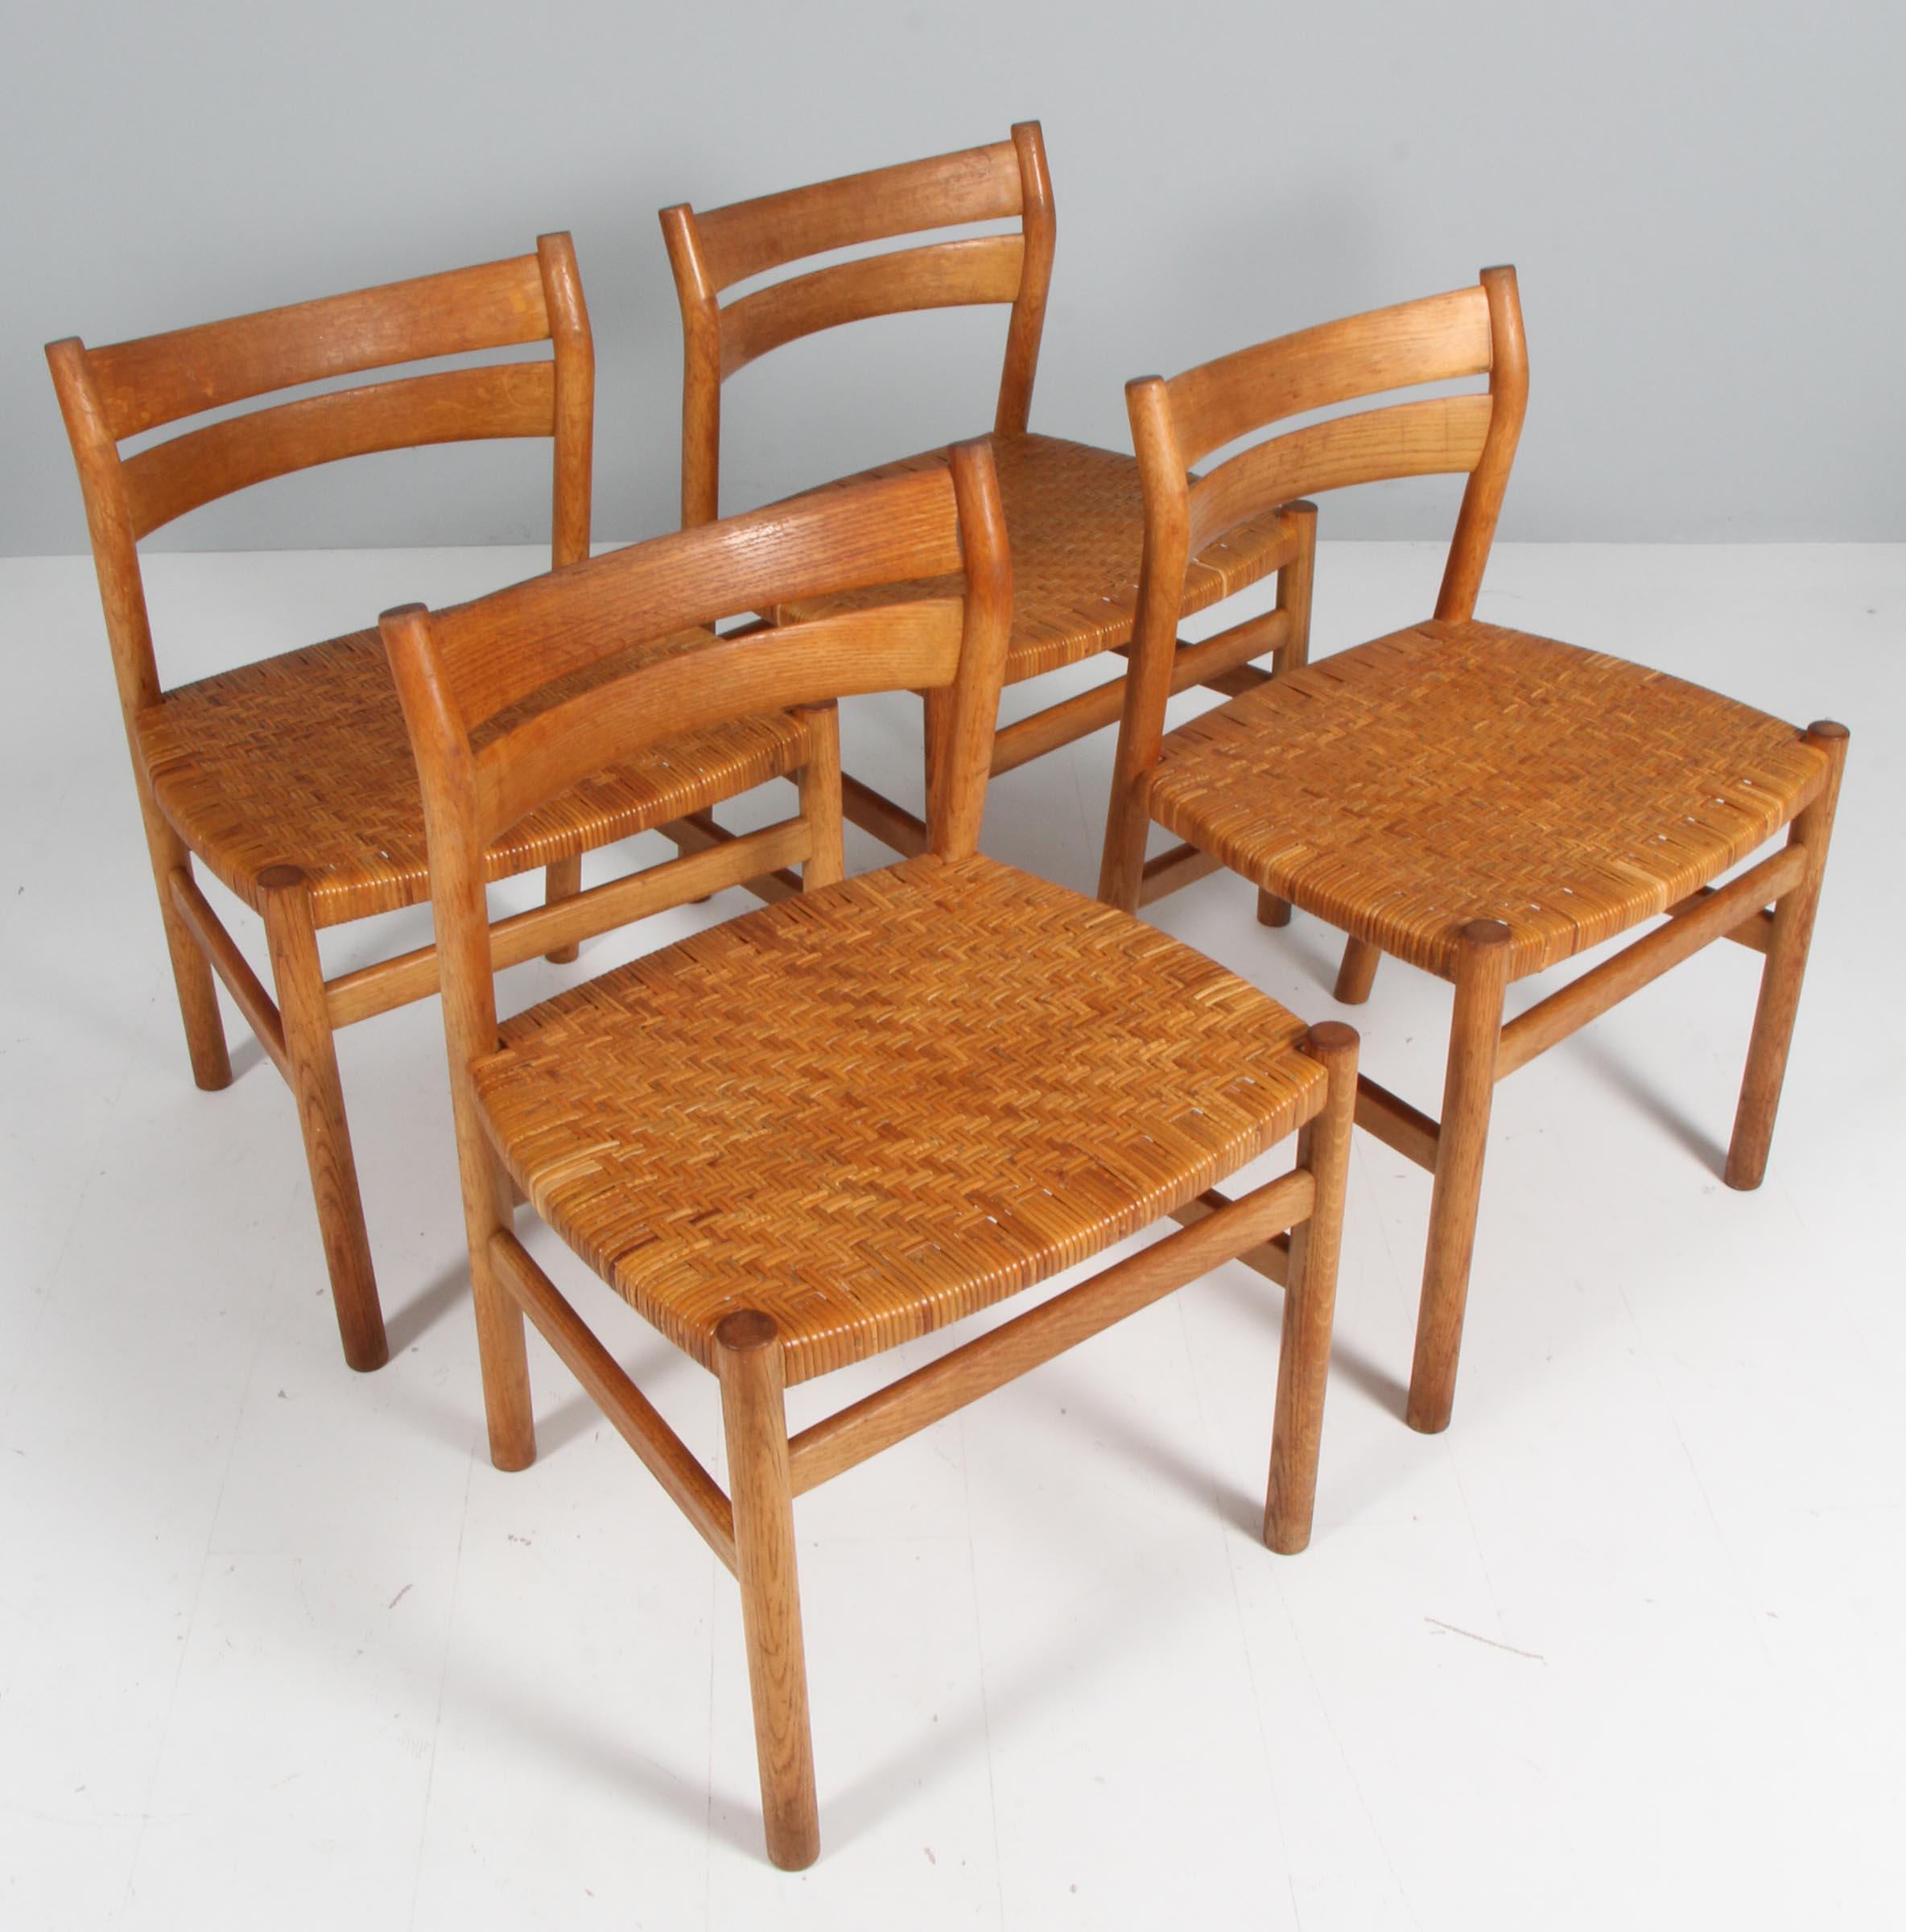 Børge Mogensen set of four dining chairs with seat of cane.

Frame of oak.

Made by C. M. Madsen. Model BM1.